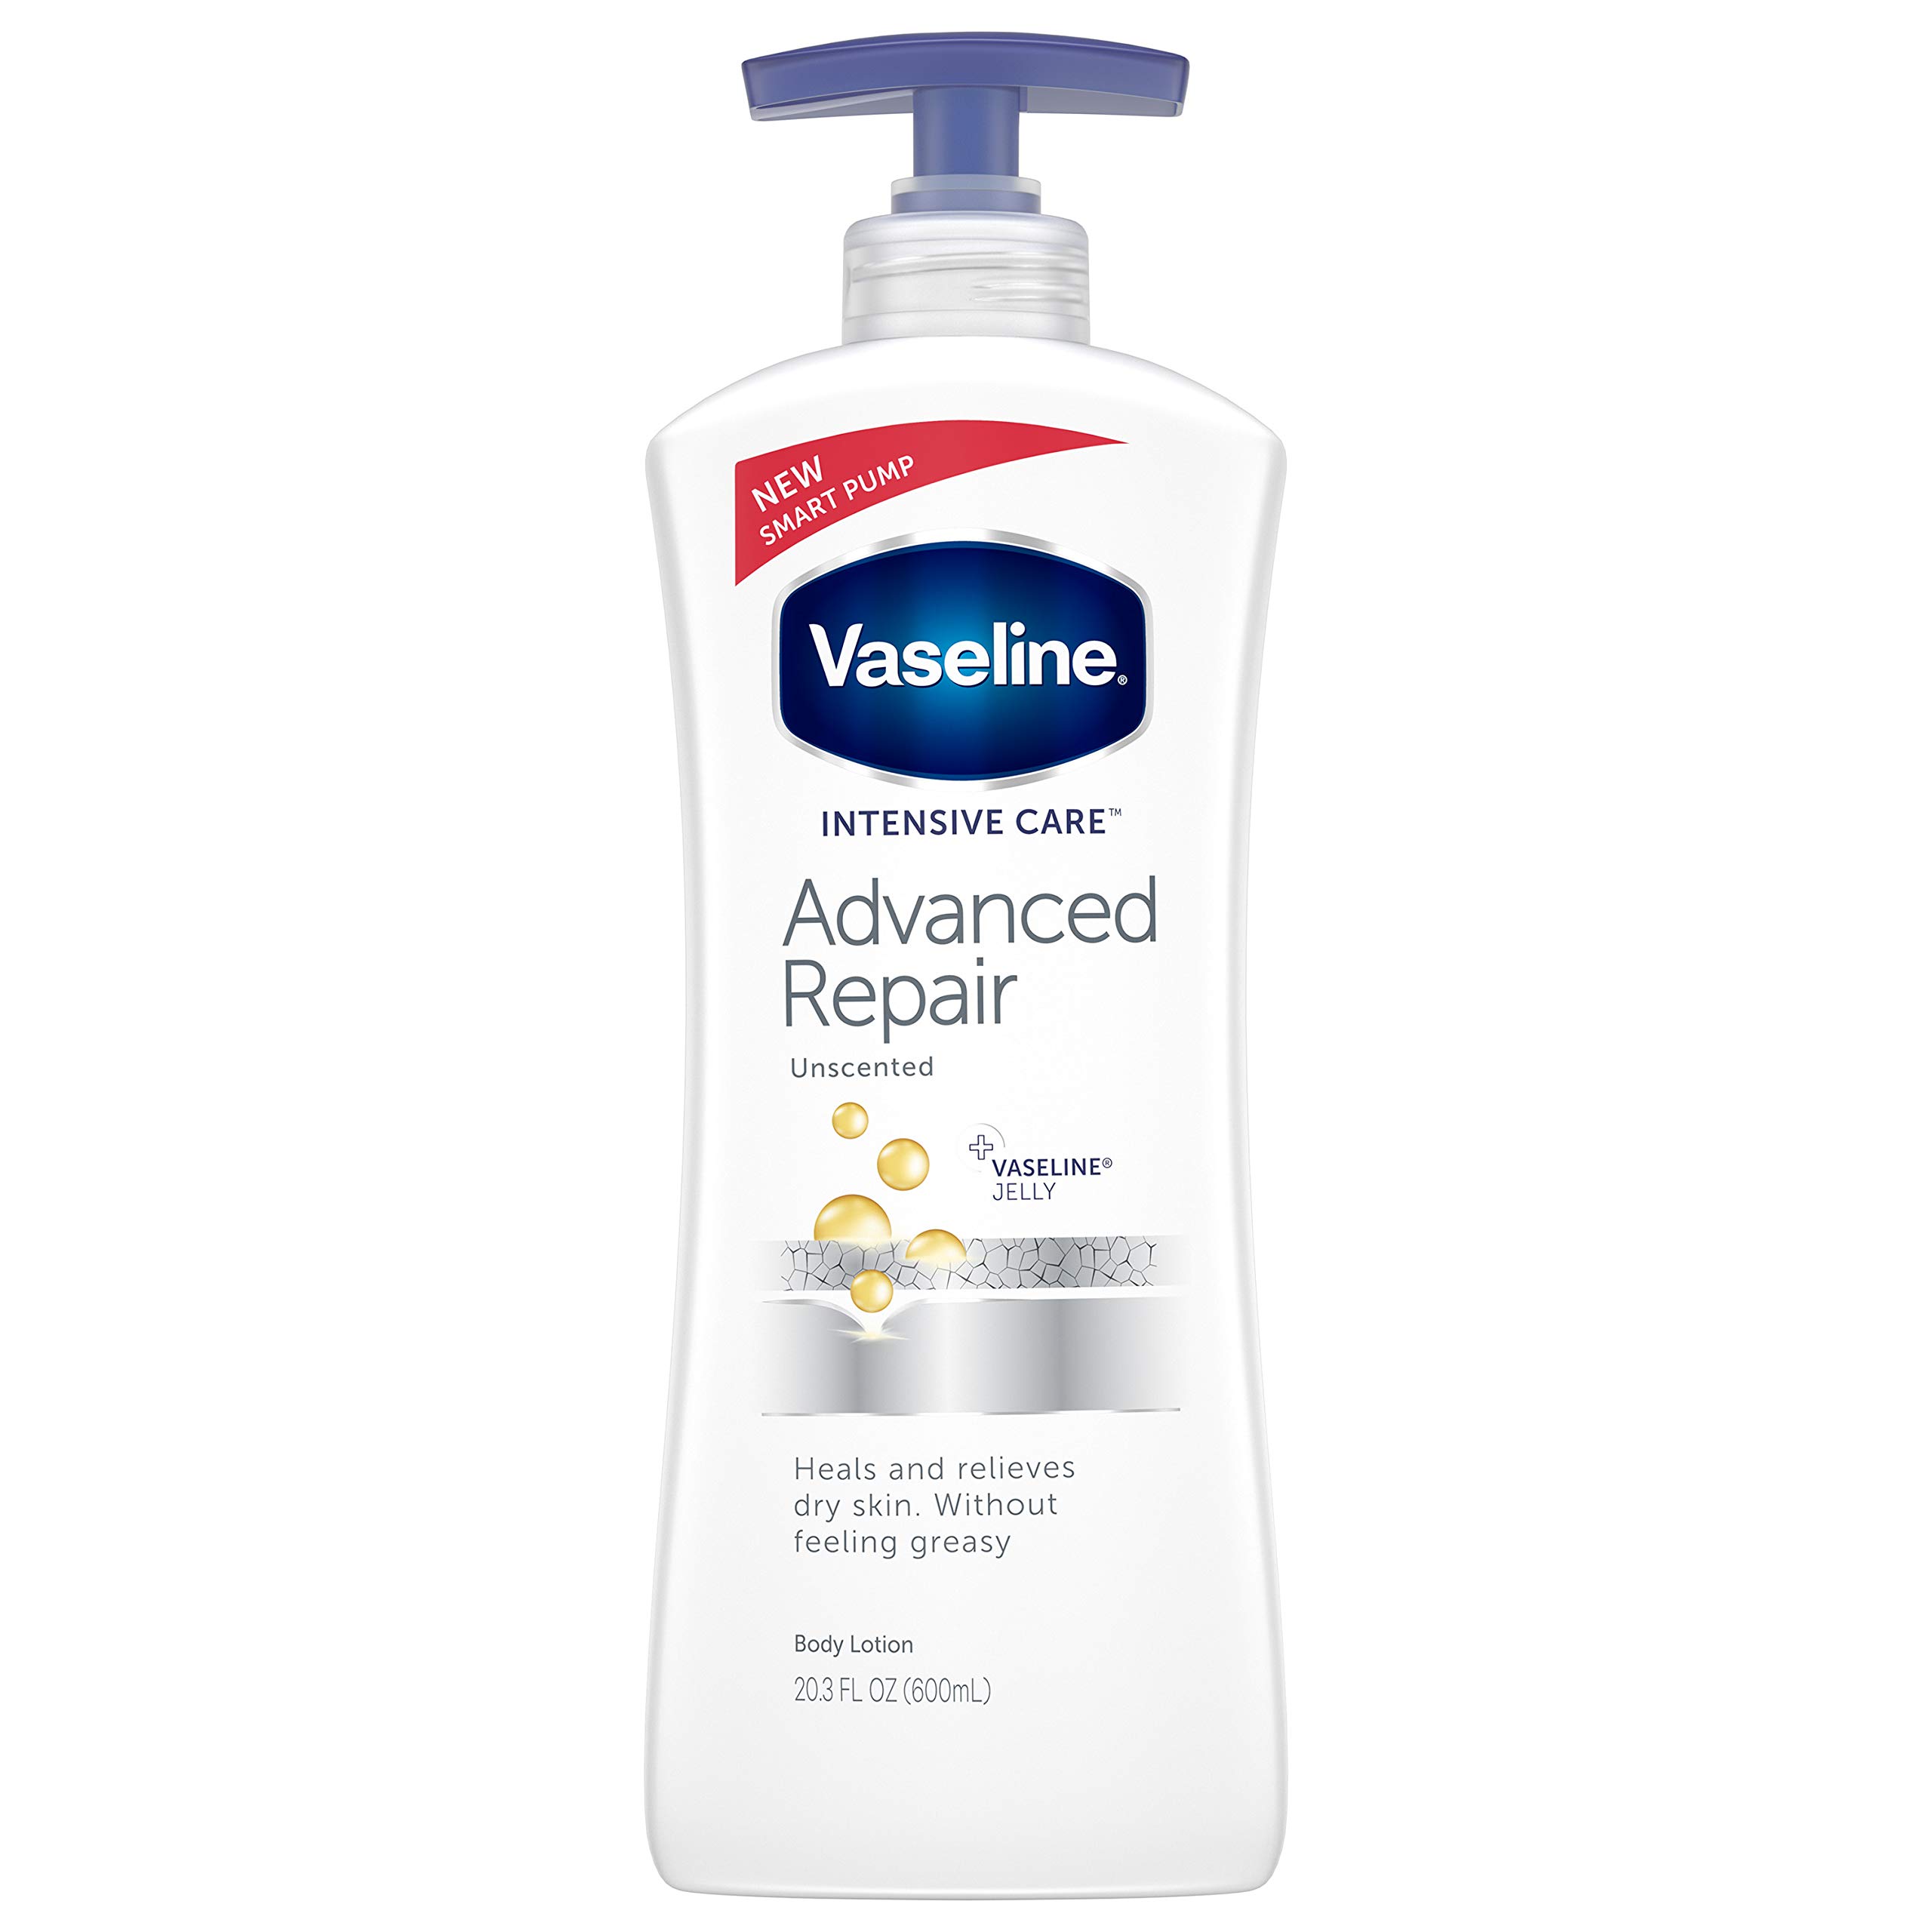 Vaseline Intensive Care Body Lotion, Advanced Repair Unscented, 20.3 oz